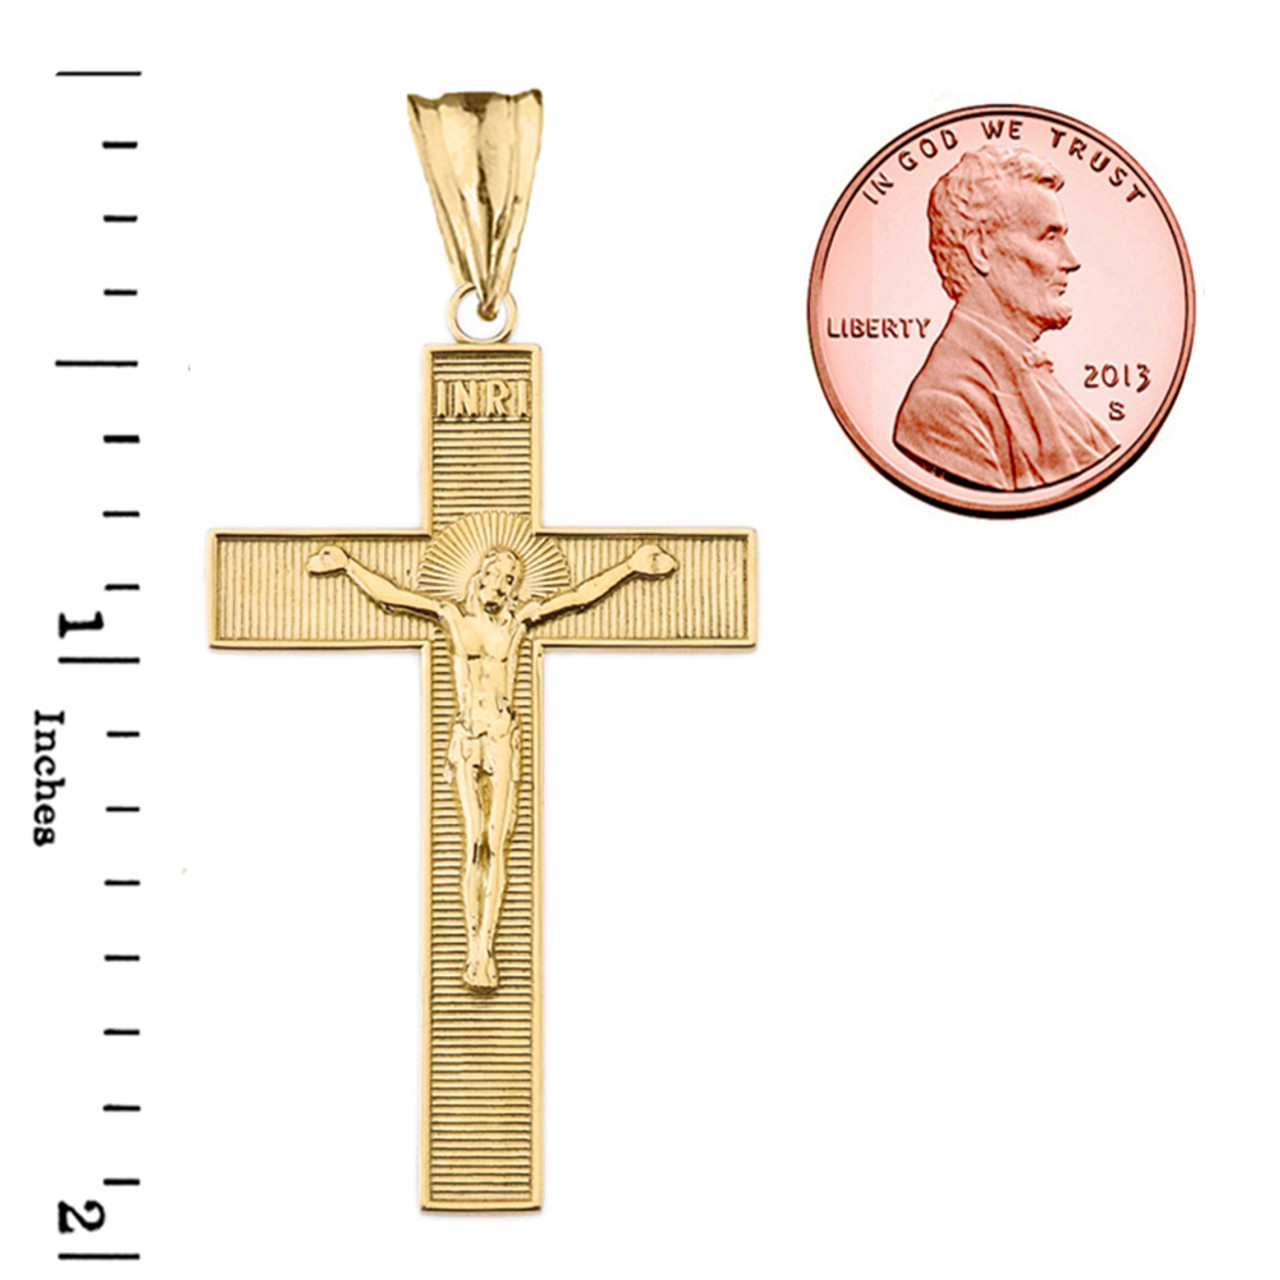 High Polish 14K Two Tone Gold Textured Cross Passion Crucifix Pendant Necklace